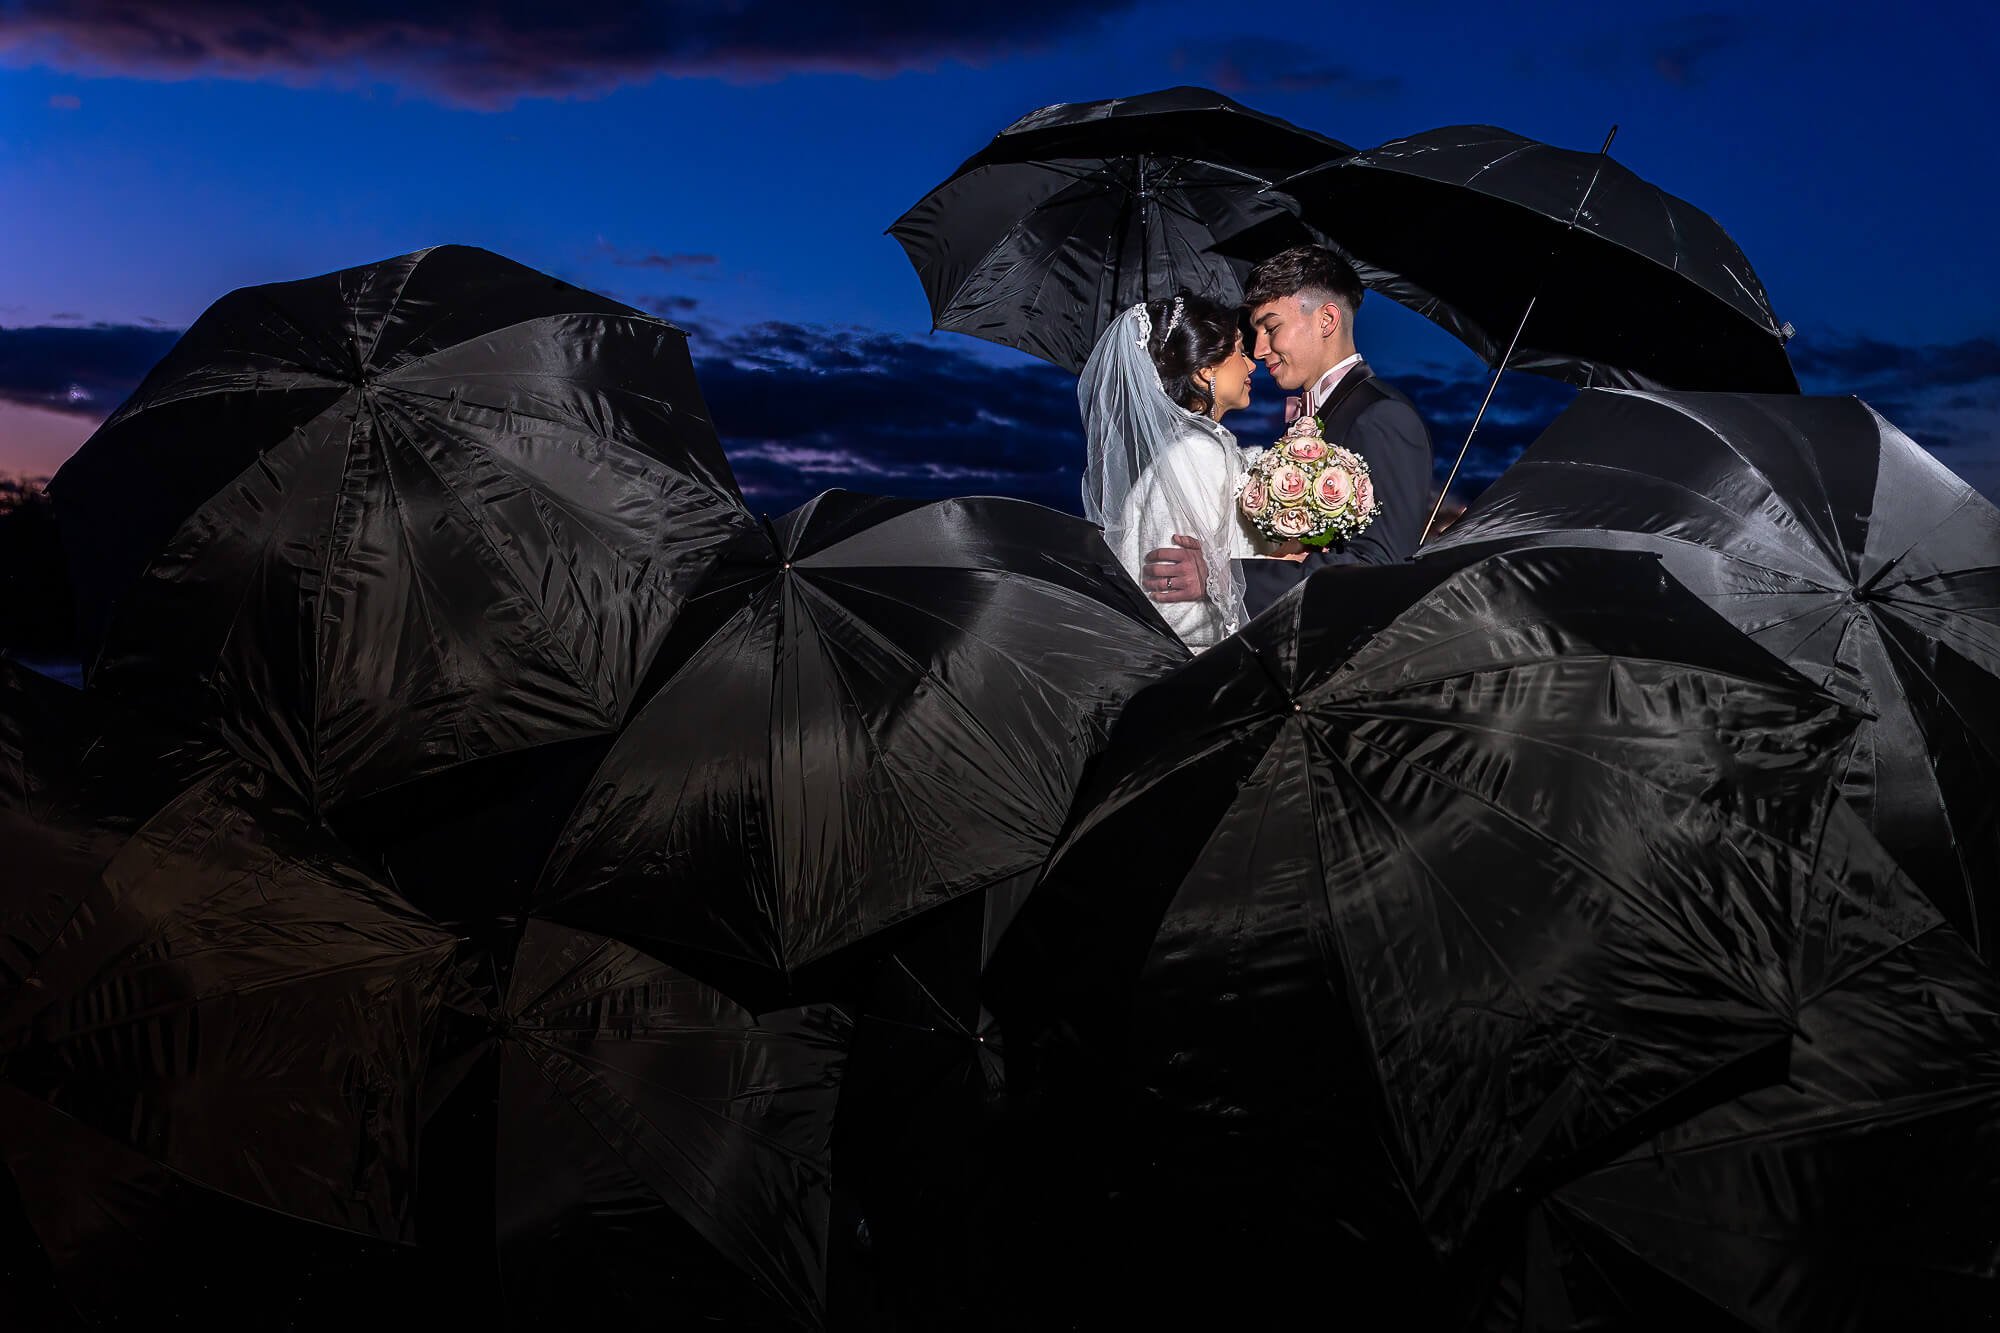 Rain on your wedding day - no problem with a professional wedding photographer at your side.